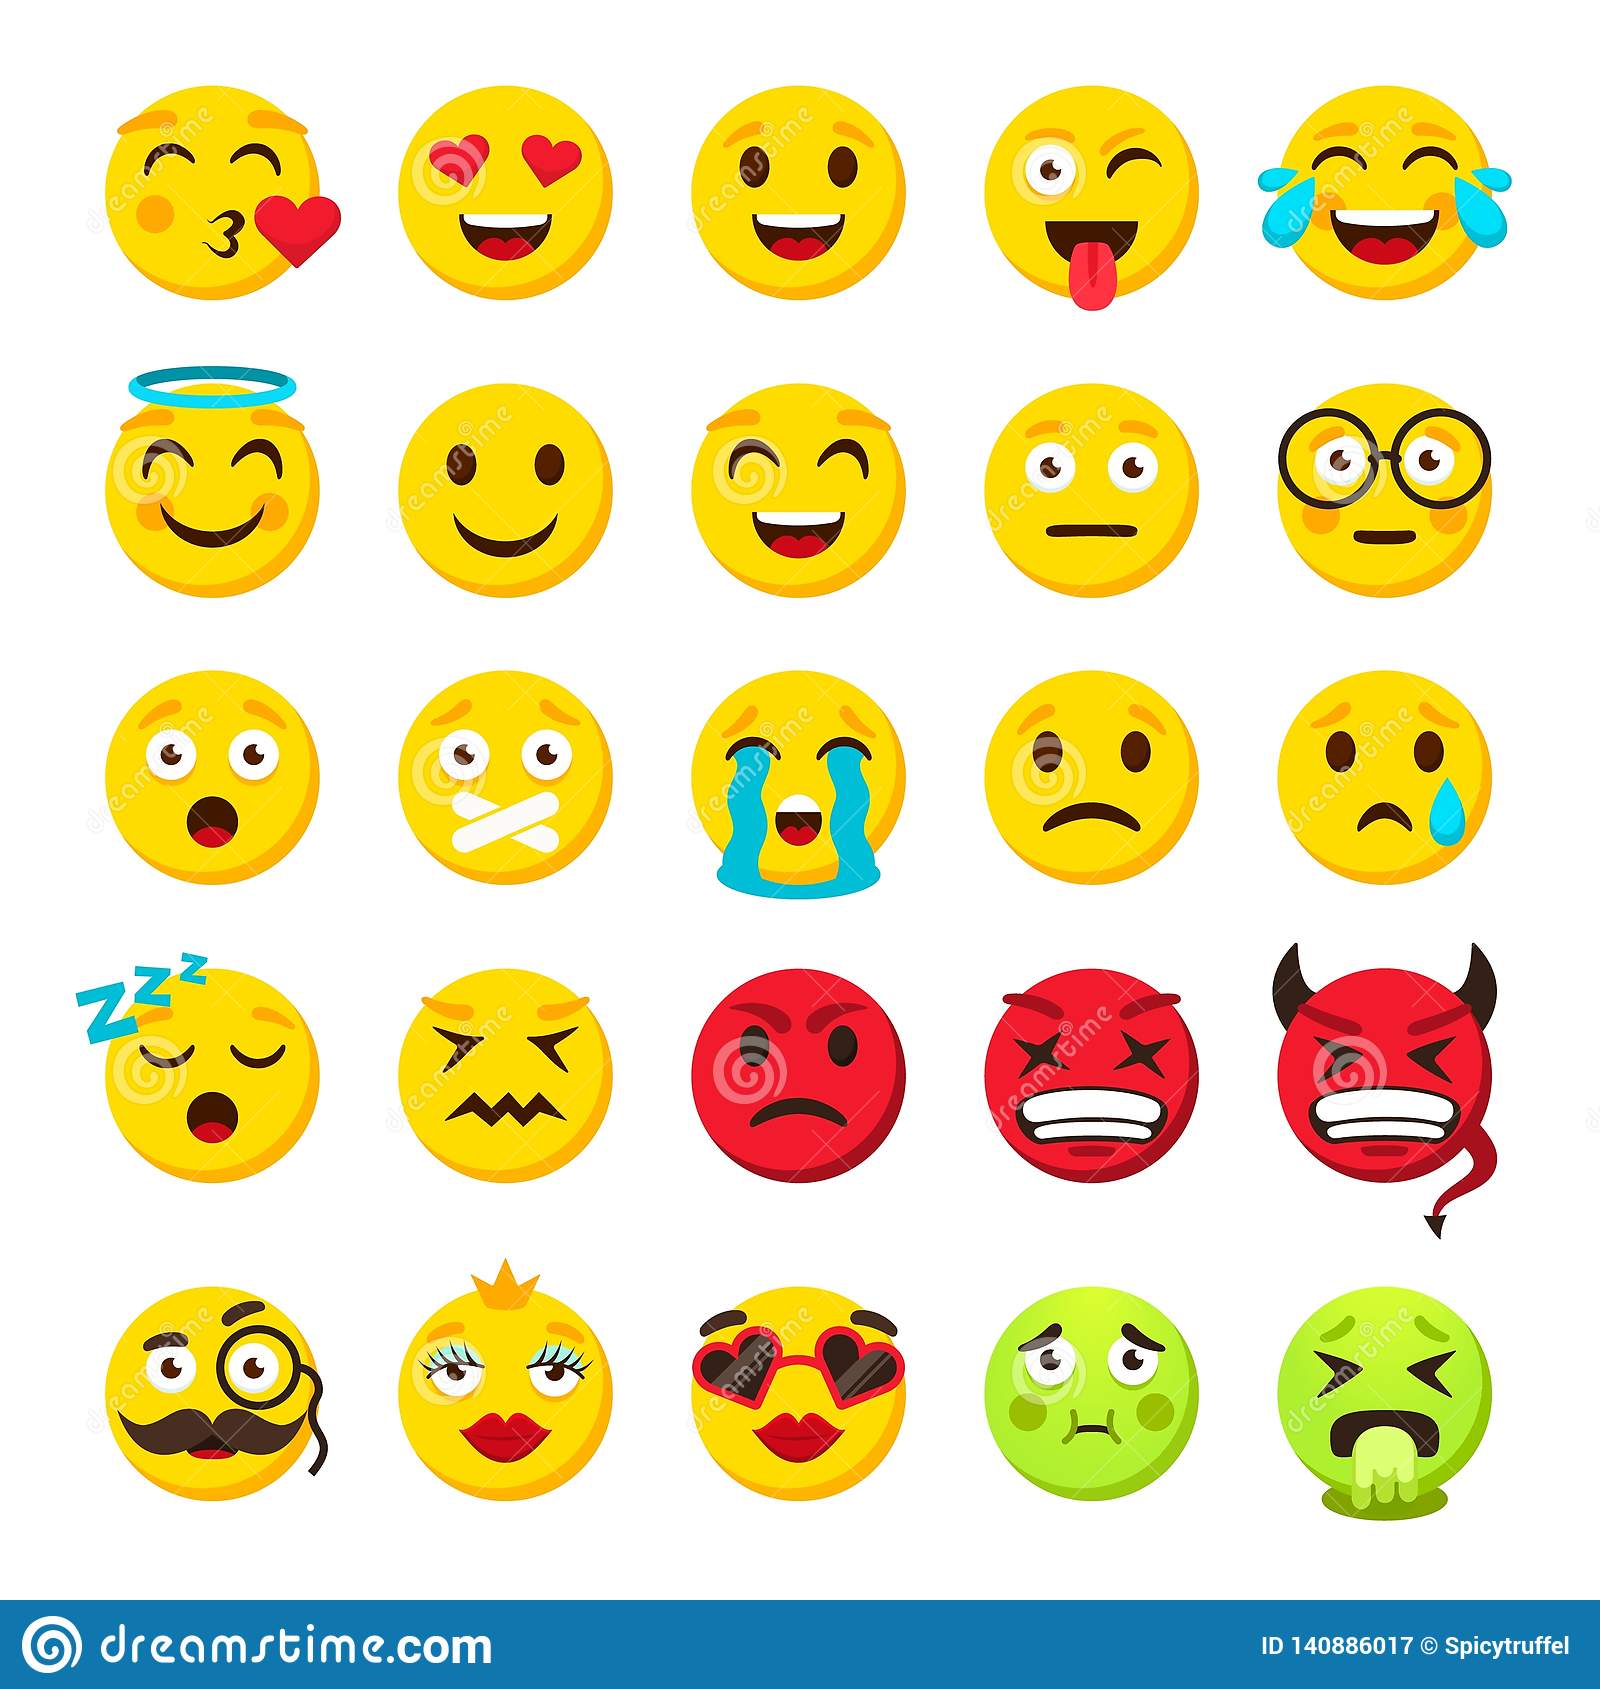 Smily Faces Images